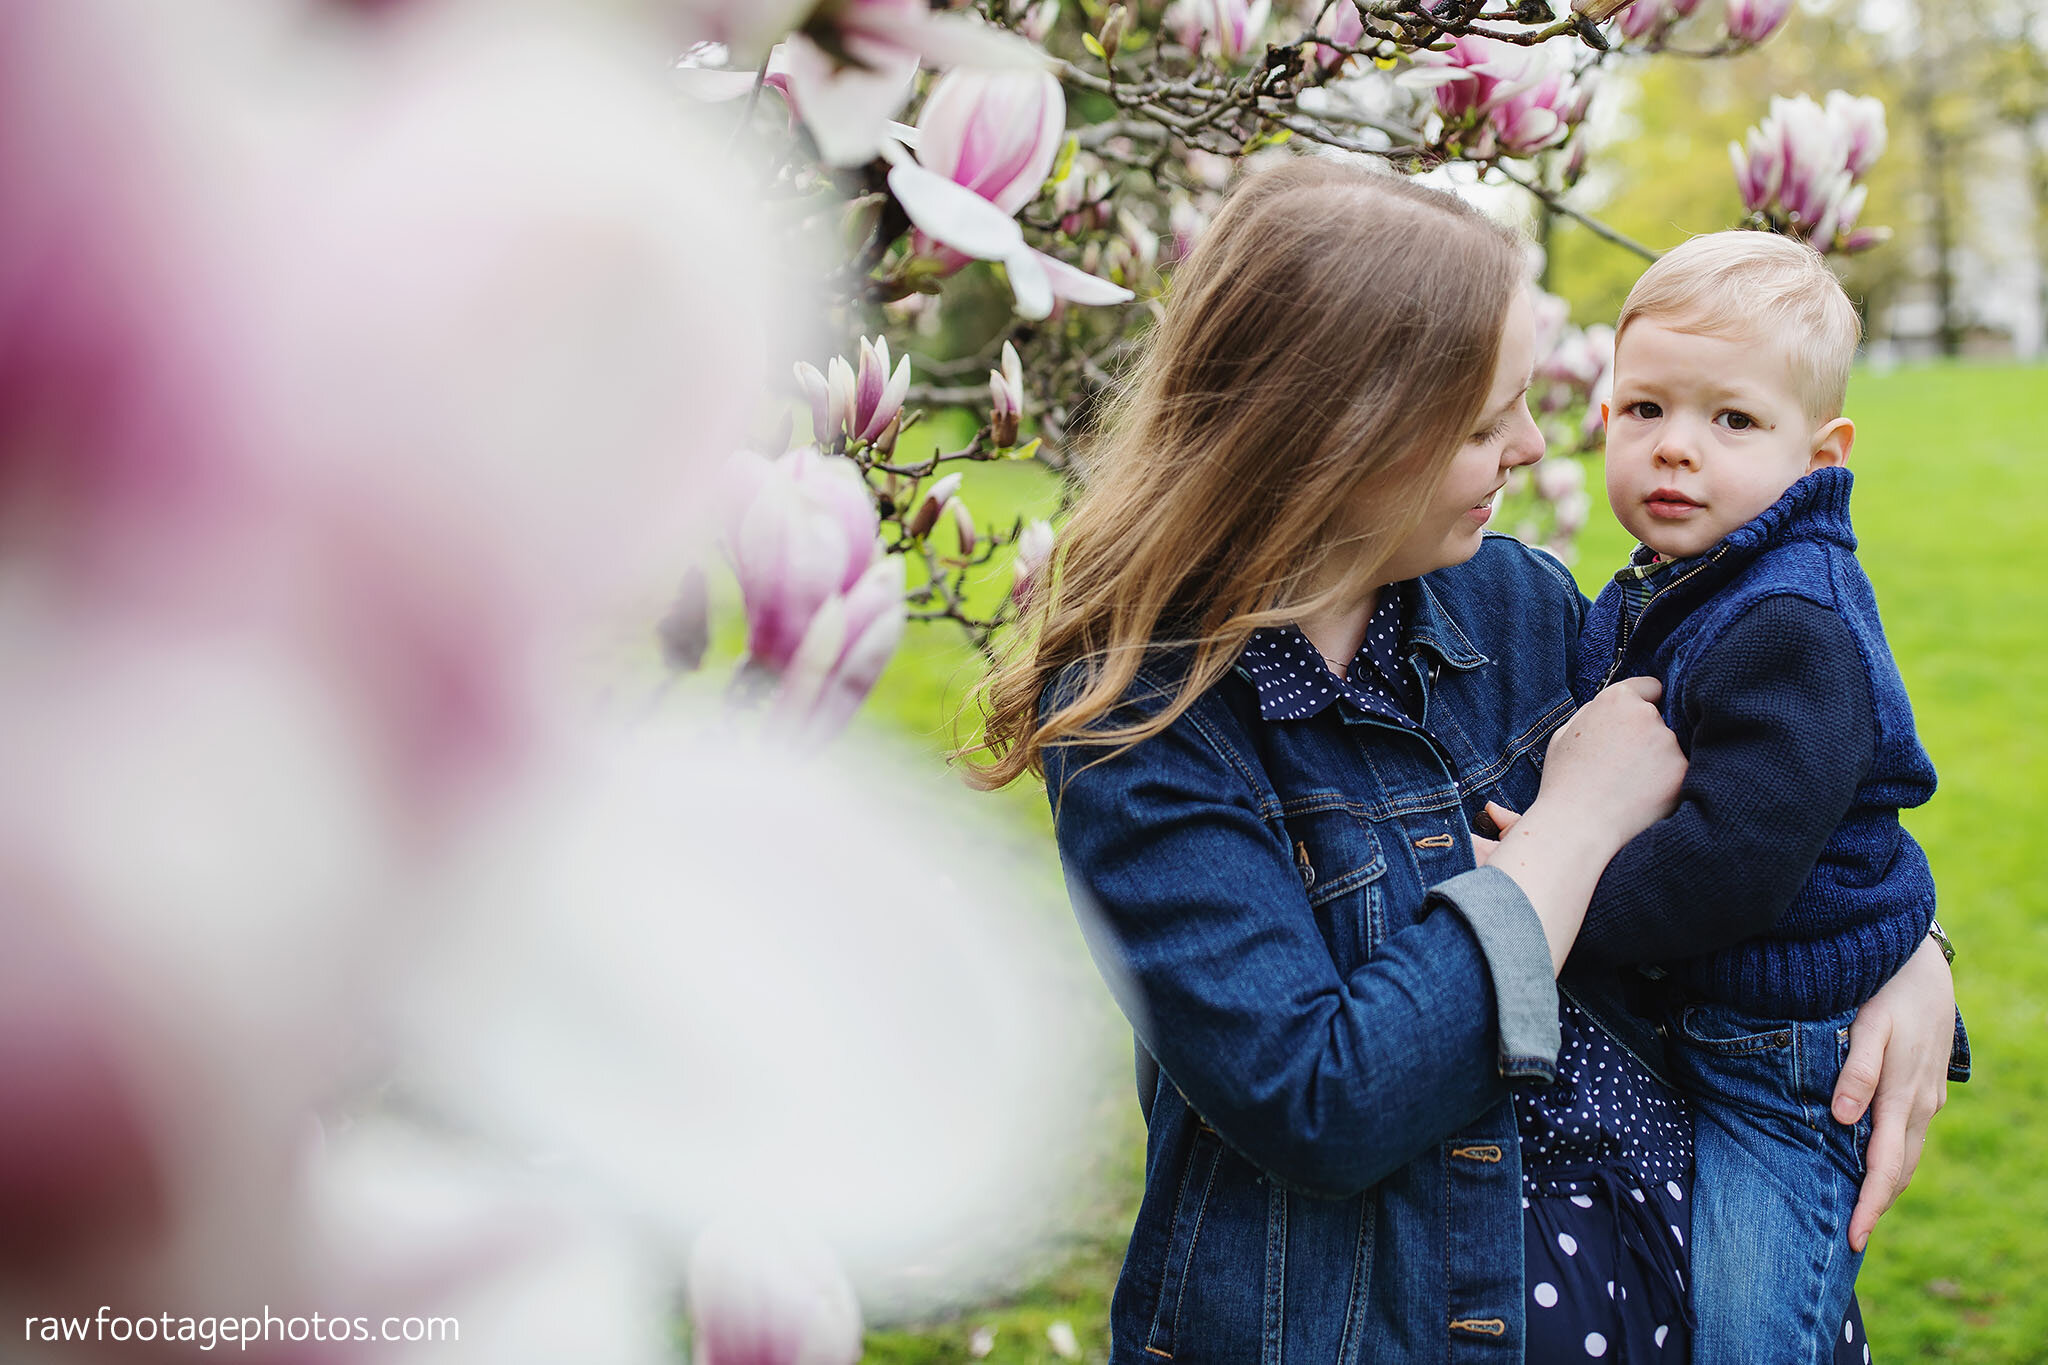 london_ontario_family_photographer-raw_footage_photography-spring_blossoms-extended_family_session-magnolia-blossoms_018.jpg